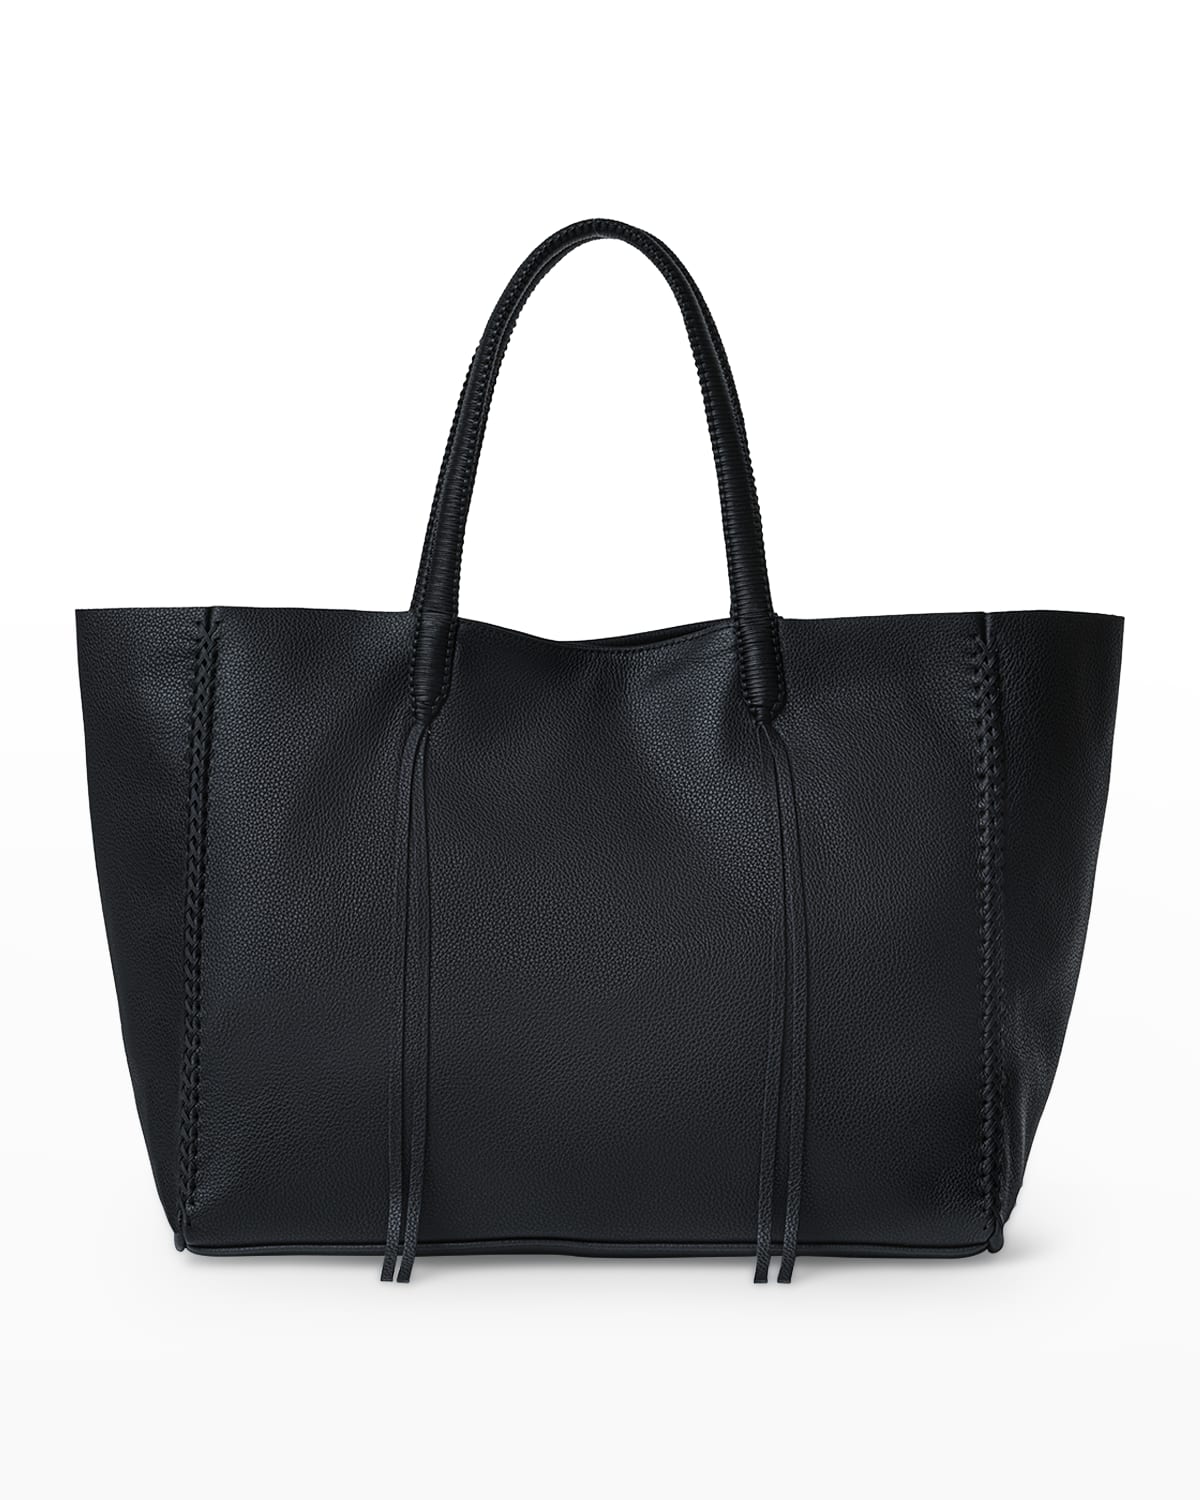 Callista East-West Grained Leather Tote Bag